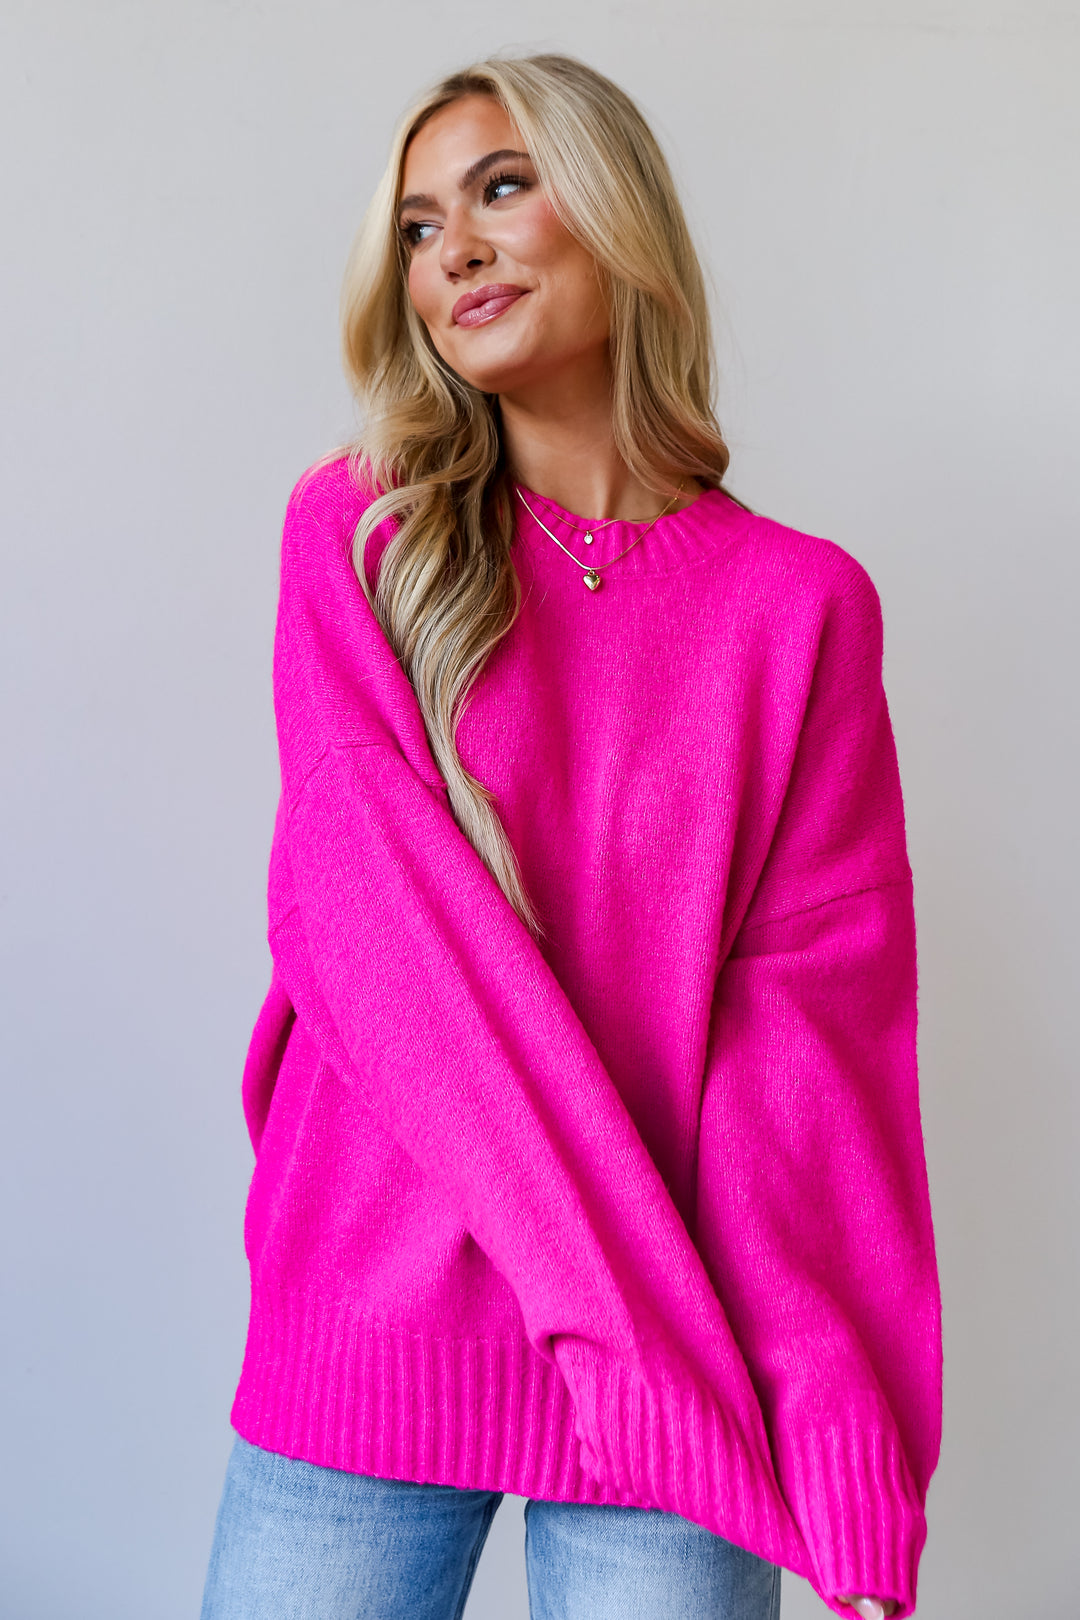 pink Oversized Sweater front view